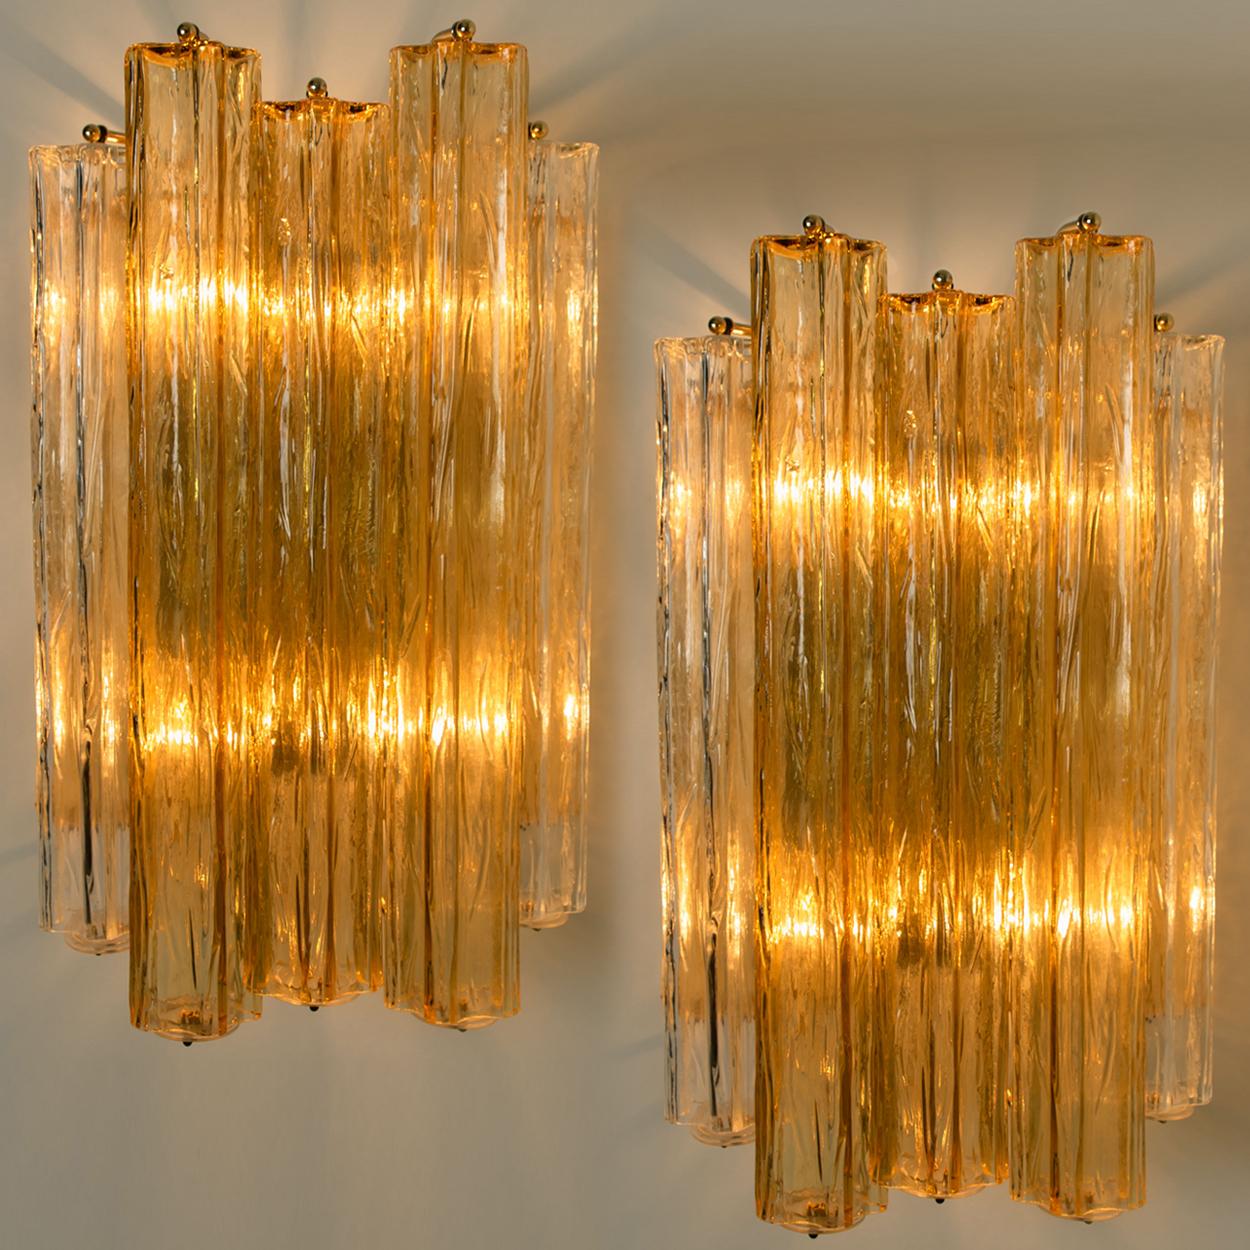 Steel 1 of the 2 Extra Large Wall Sconces or Wall Lights Murano Glass, Barovier & Toso